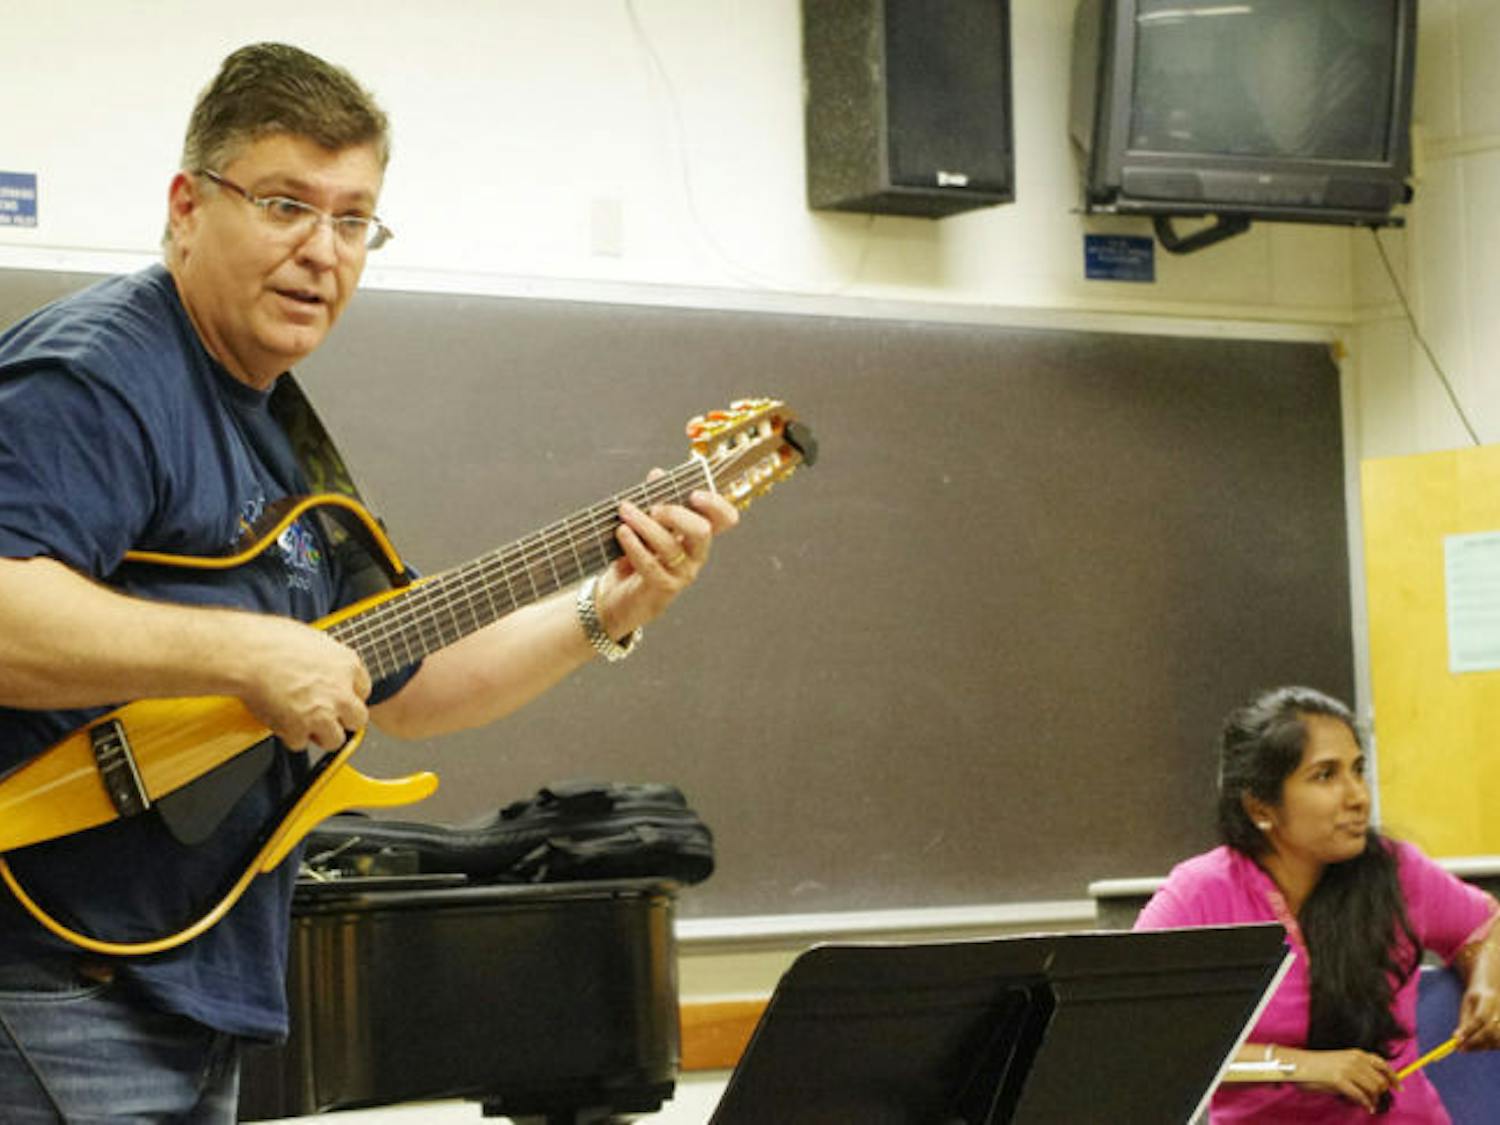 Welson Tremura, associate professor of music and director of the Brazilian Music Institute, teaches Brazilian techniques in the music building Wednesday morning.&nbsp;
&nbsp;